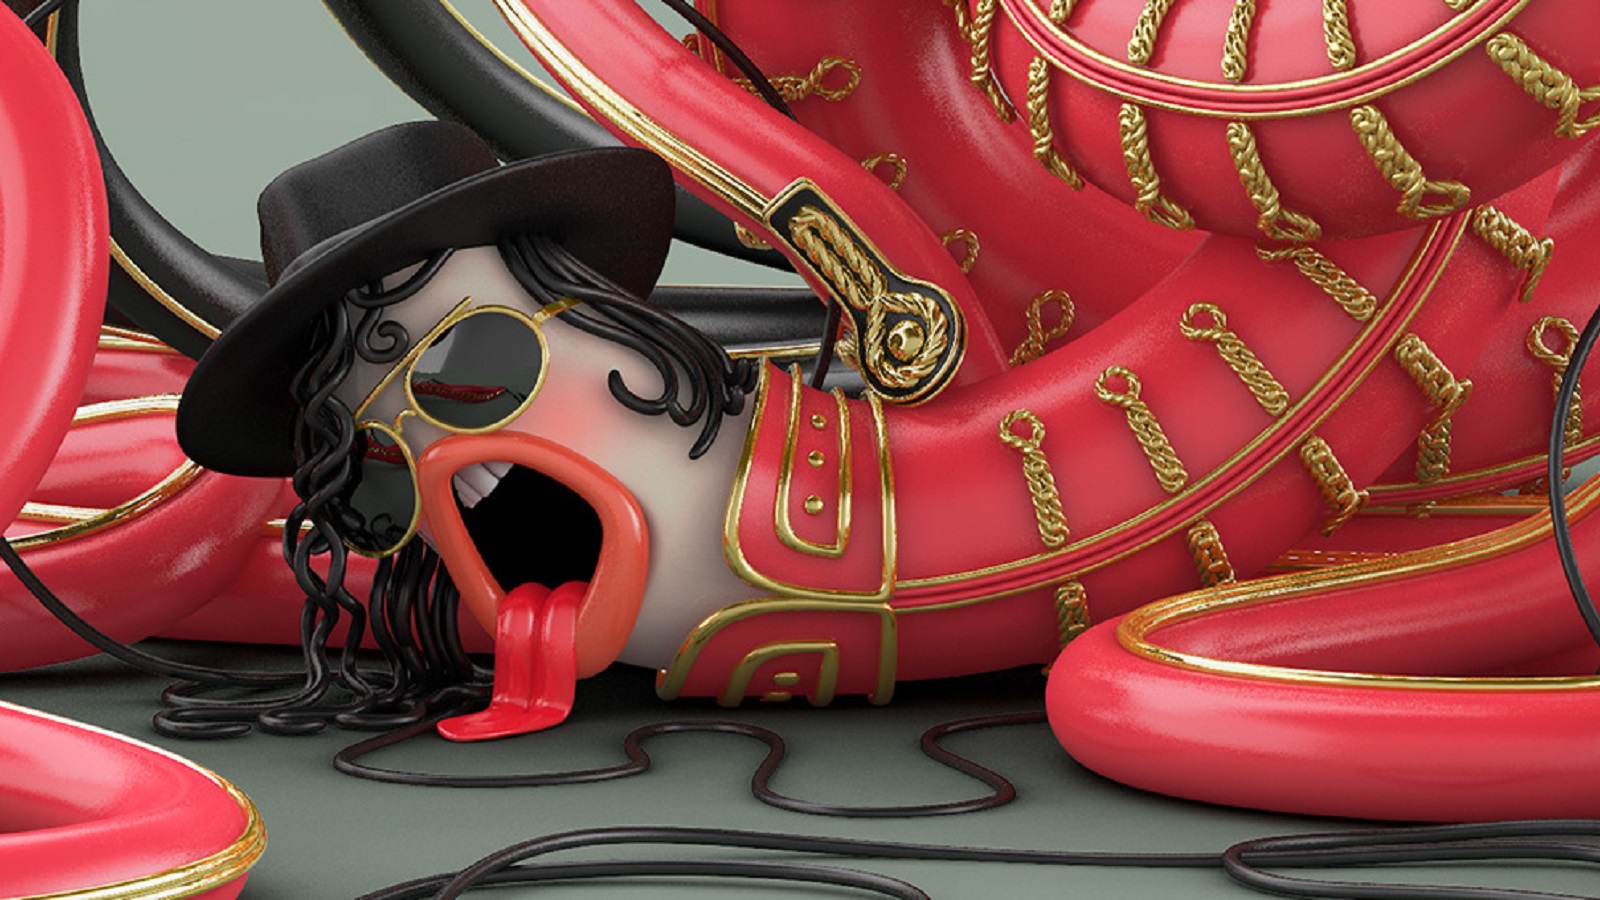 Tangled Music Stars Illustrate the Real Struggle with Knotted Headphones